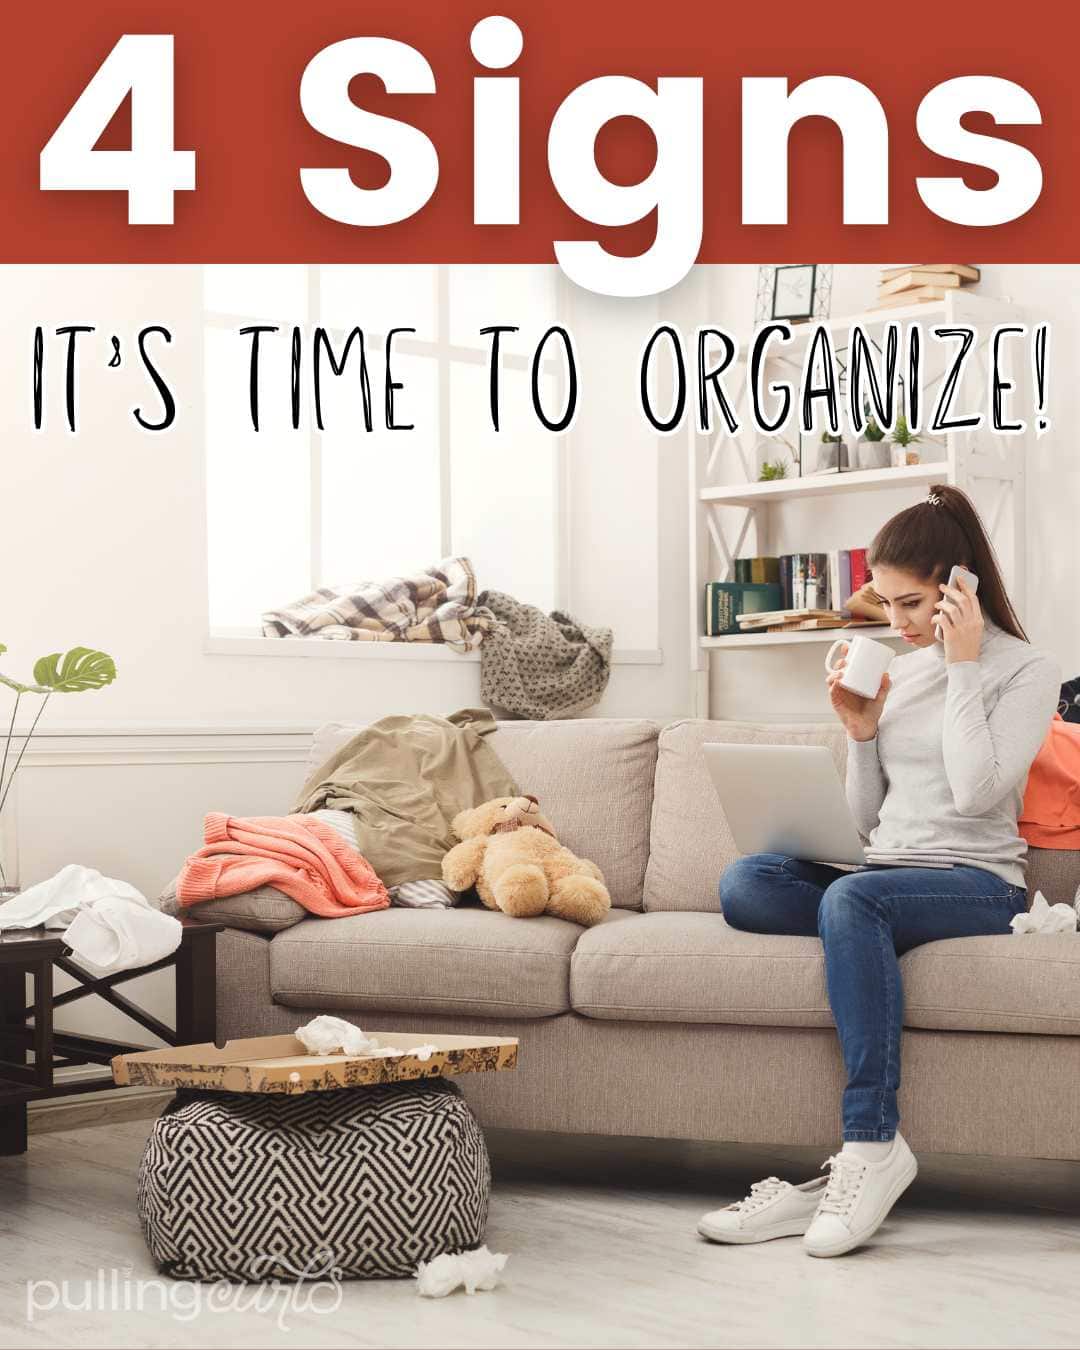 Discover the telltale signs it's time to get organized! From clutter chaos to productivity pitfalls, learn when to declutter and streamline your life. Get inspired with organization tips, declutter hacks, and efficient solutions. Say goodbye to mess and hello to harmony! 🗂️✨ #OrganizationGoals #DeclutterTips #HomeOrganization #ProductivityHacks #StreamlineYourLife #EfficiencyBoost #GetOrganized via @pullingcurls